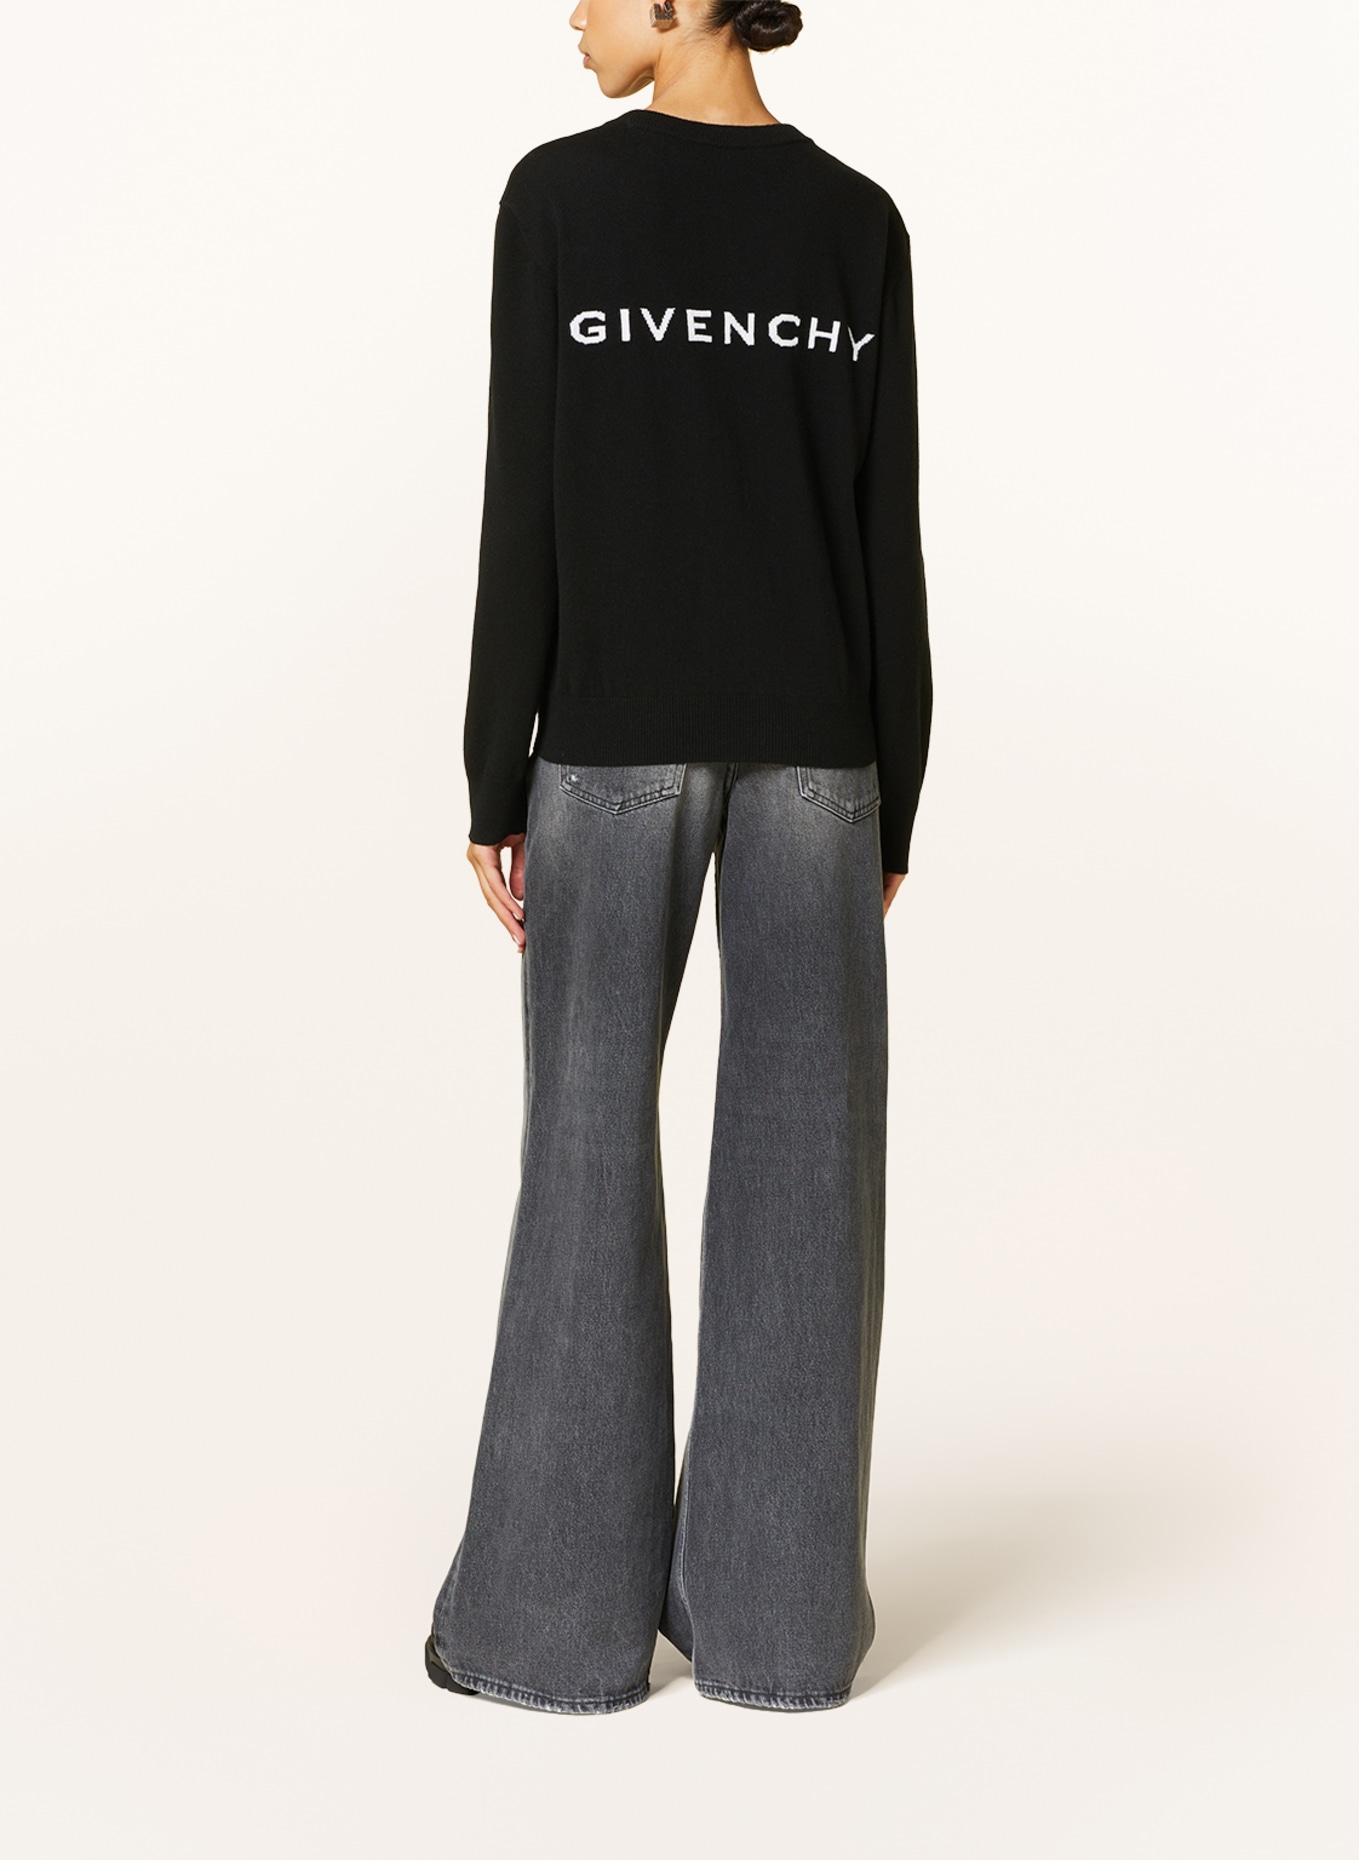 GIVENCHY Sweater, Color: BLACK (Image 2)